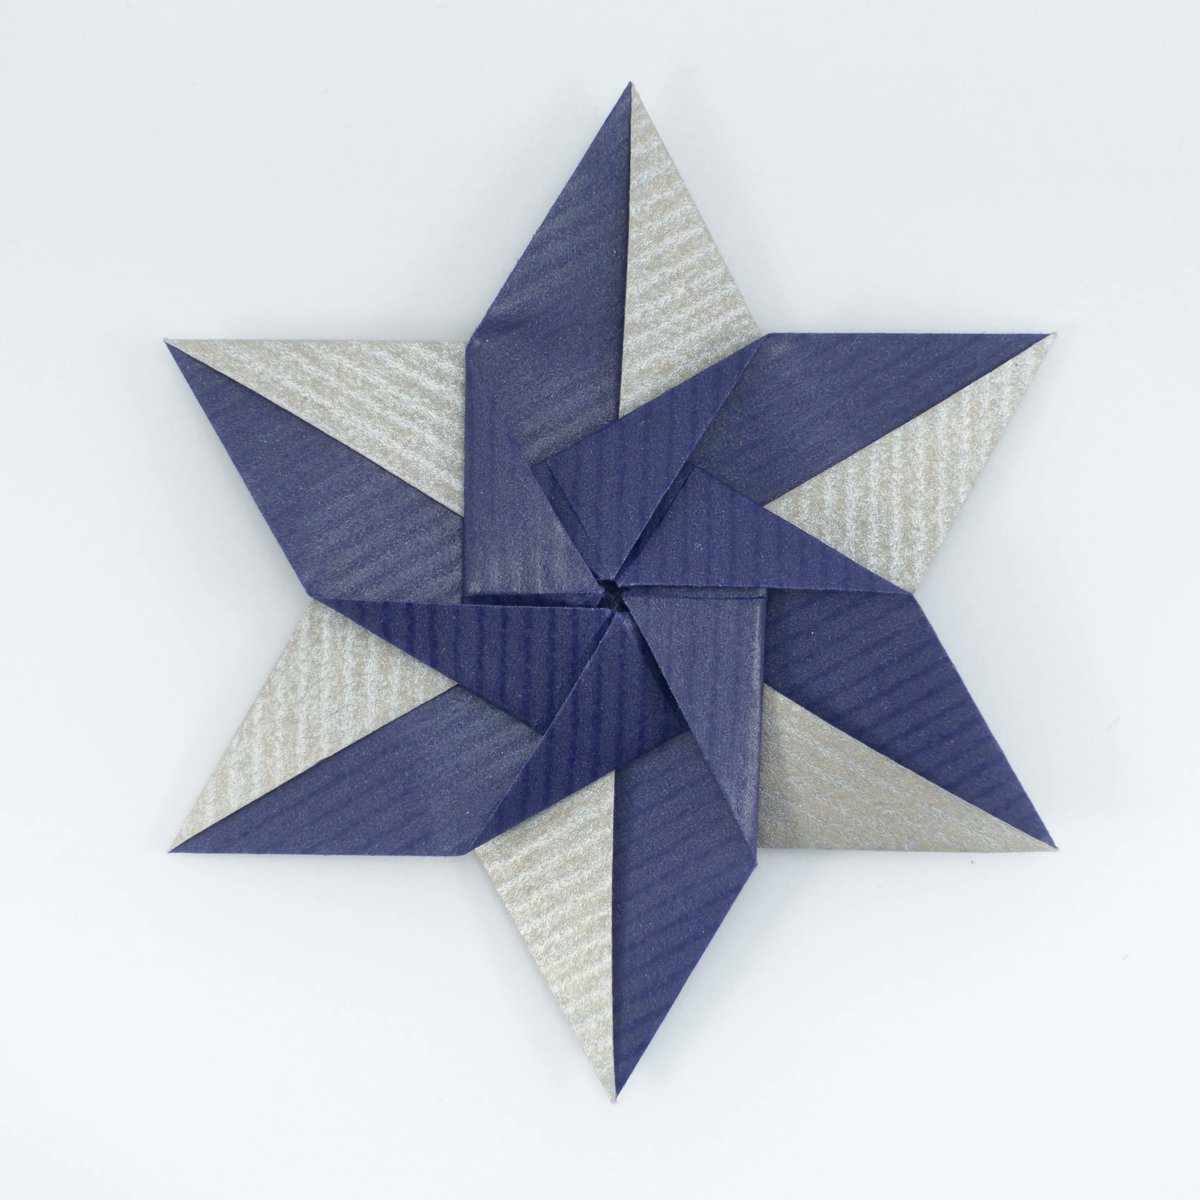 Star with Color Change (CFW 171). This star, designed by Shuzo Fujimoto, looks similar to Daffodil (CFW 100) but incorporates a color change. More: origami.kosmulski.org/models/star-co…

#origami #折り紙 #Оригами #origamistar #ShuzoFujimoto #藤本修三 #colorchange #KraftPaper